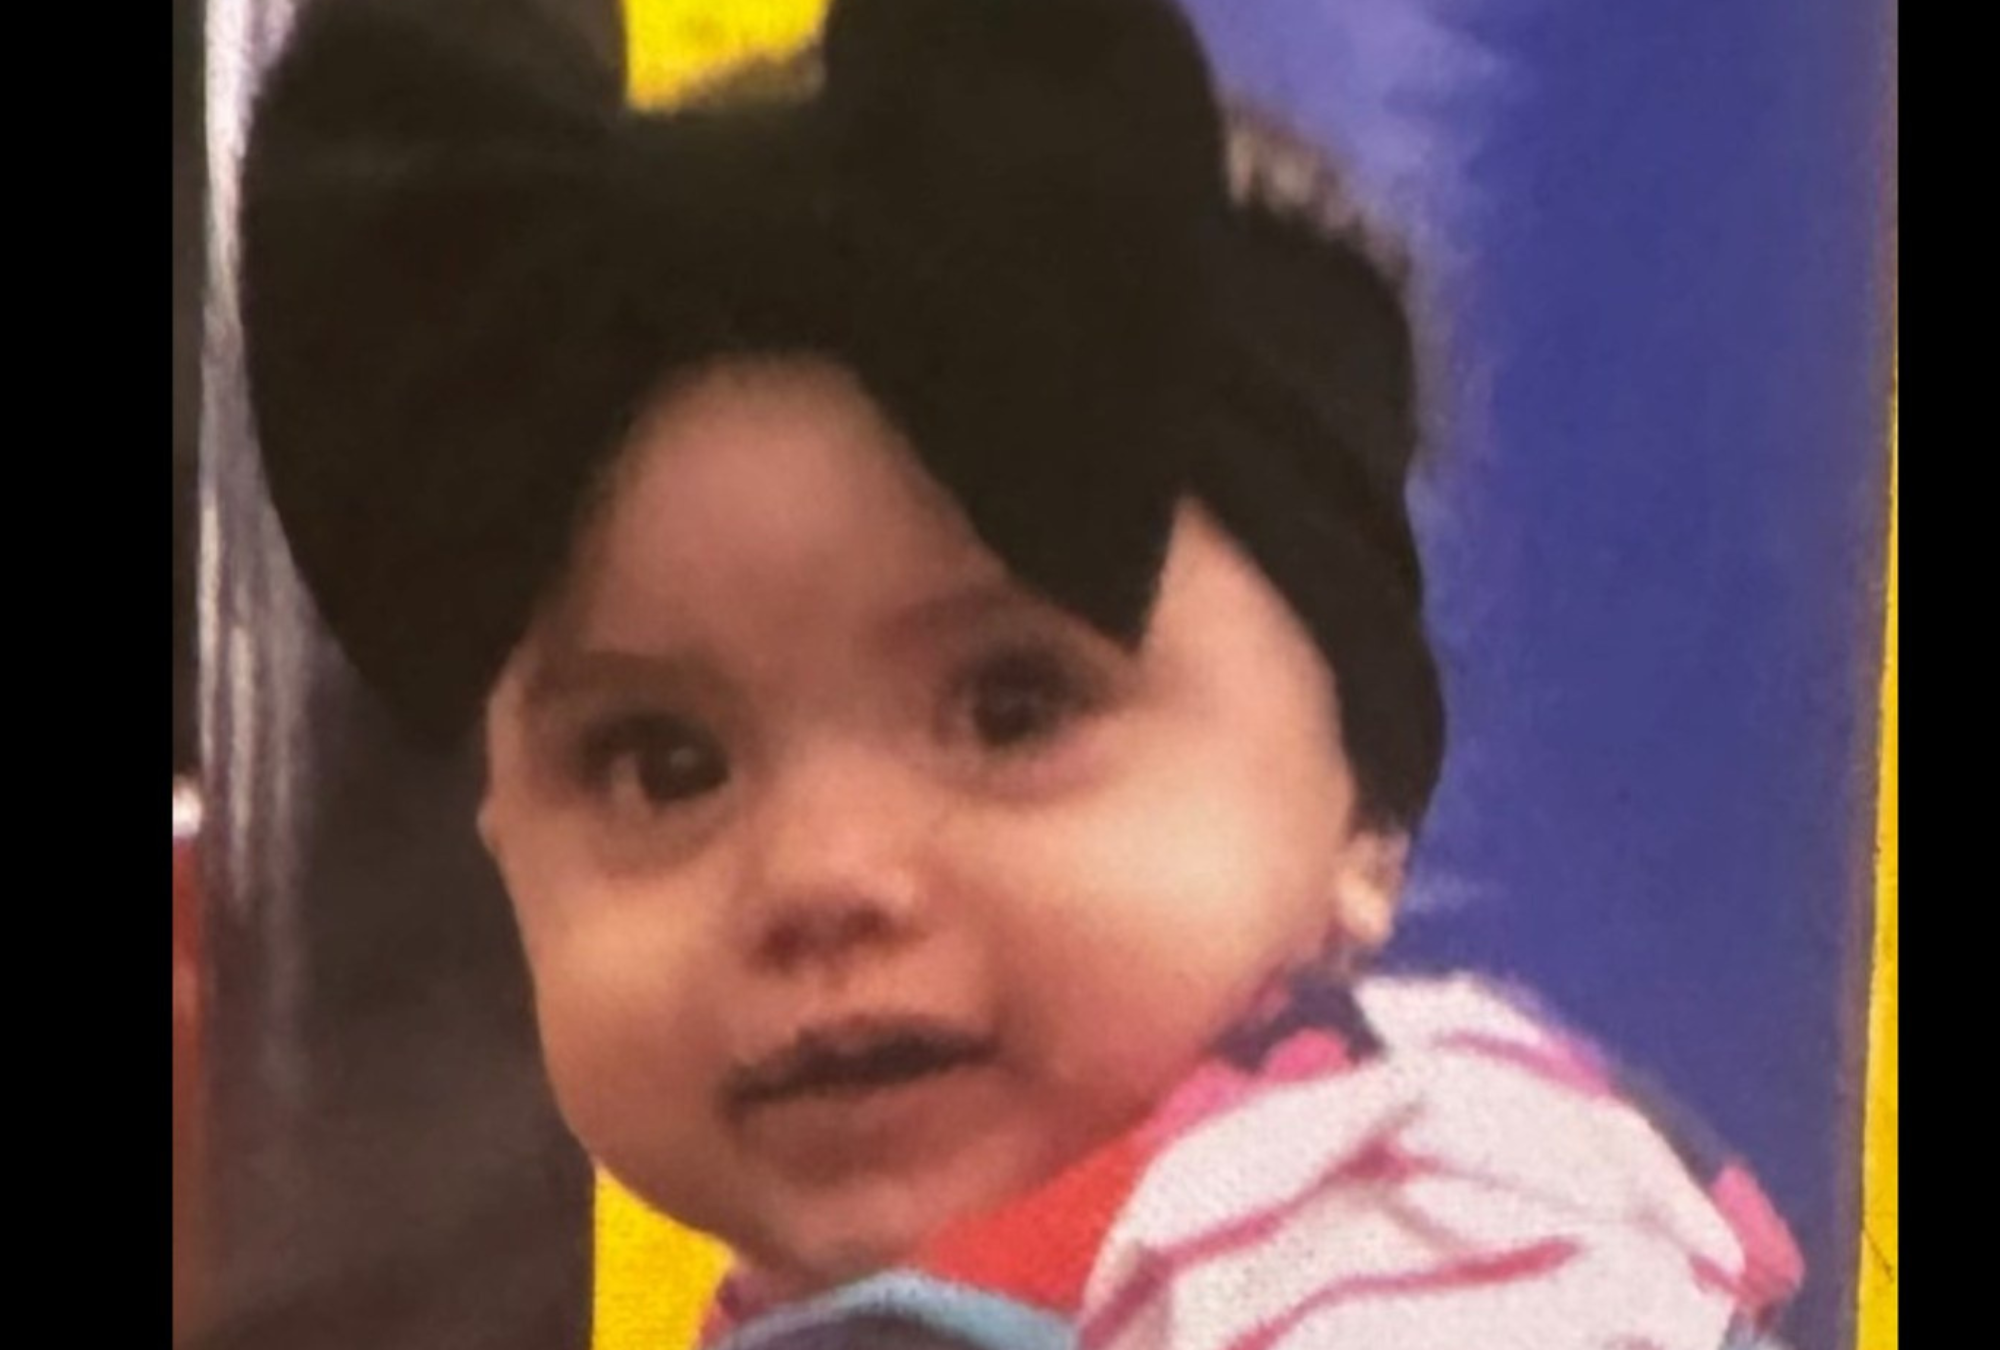 Amber Alert issued for baby after 2 women found dead at New Mexico park